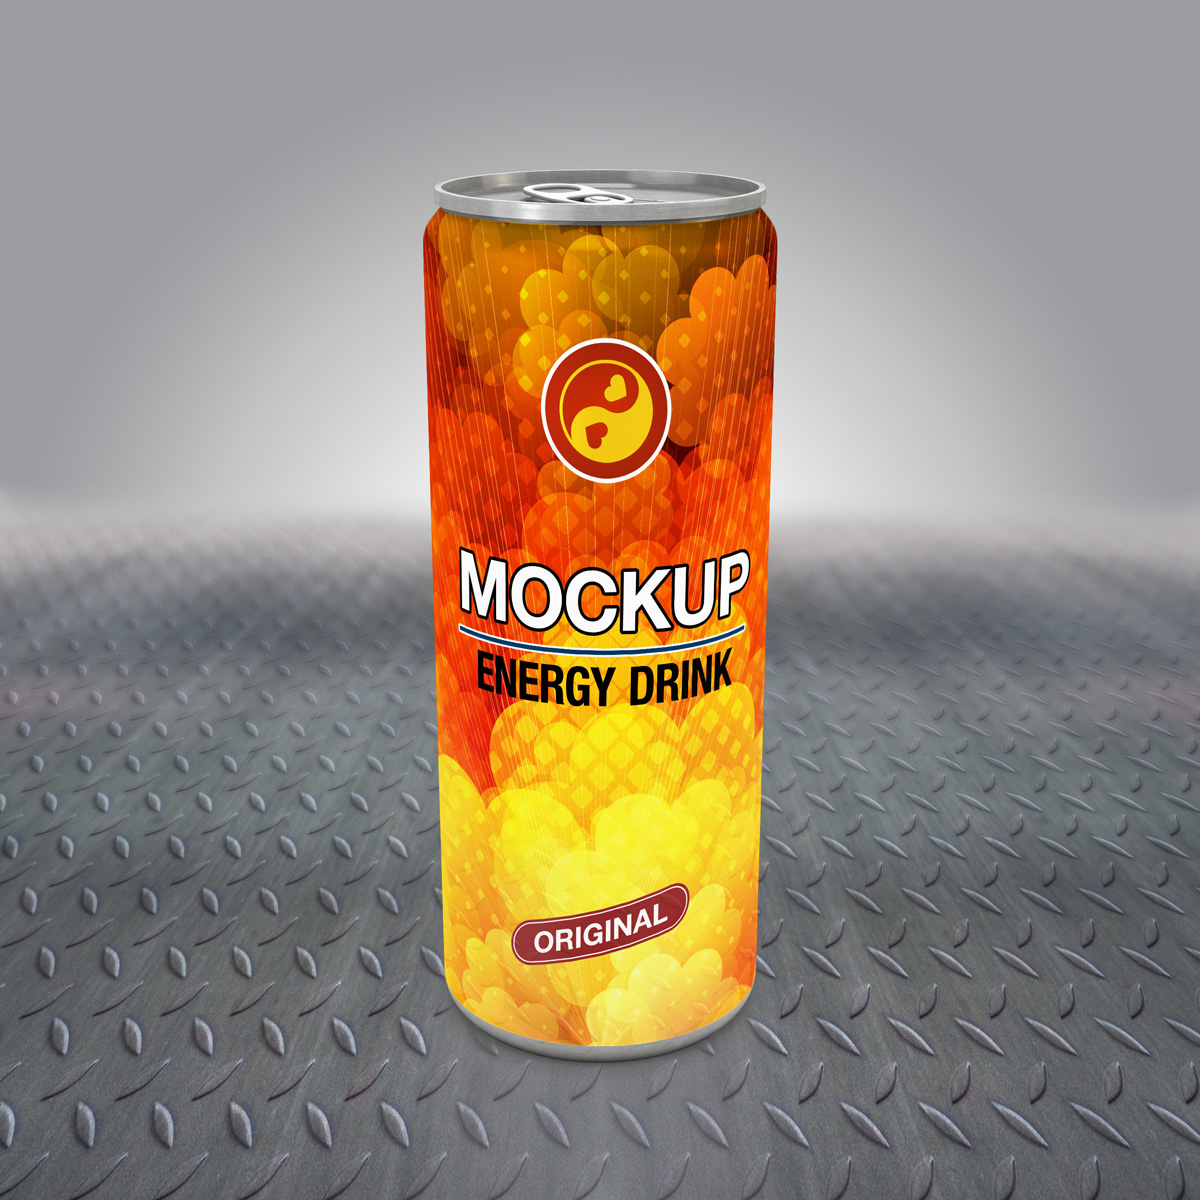 Download FREE energy drink mockup (PSD) on Behance